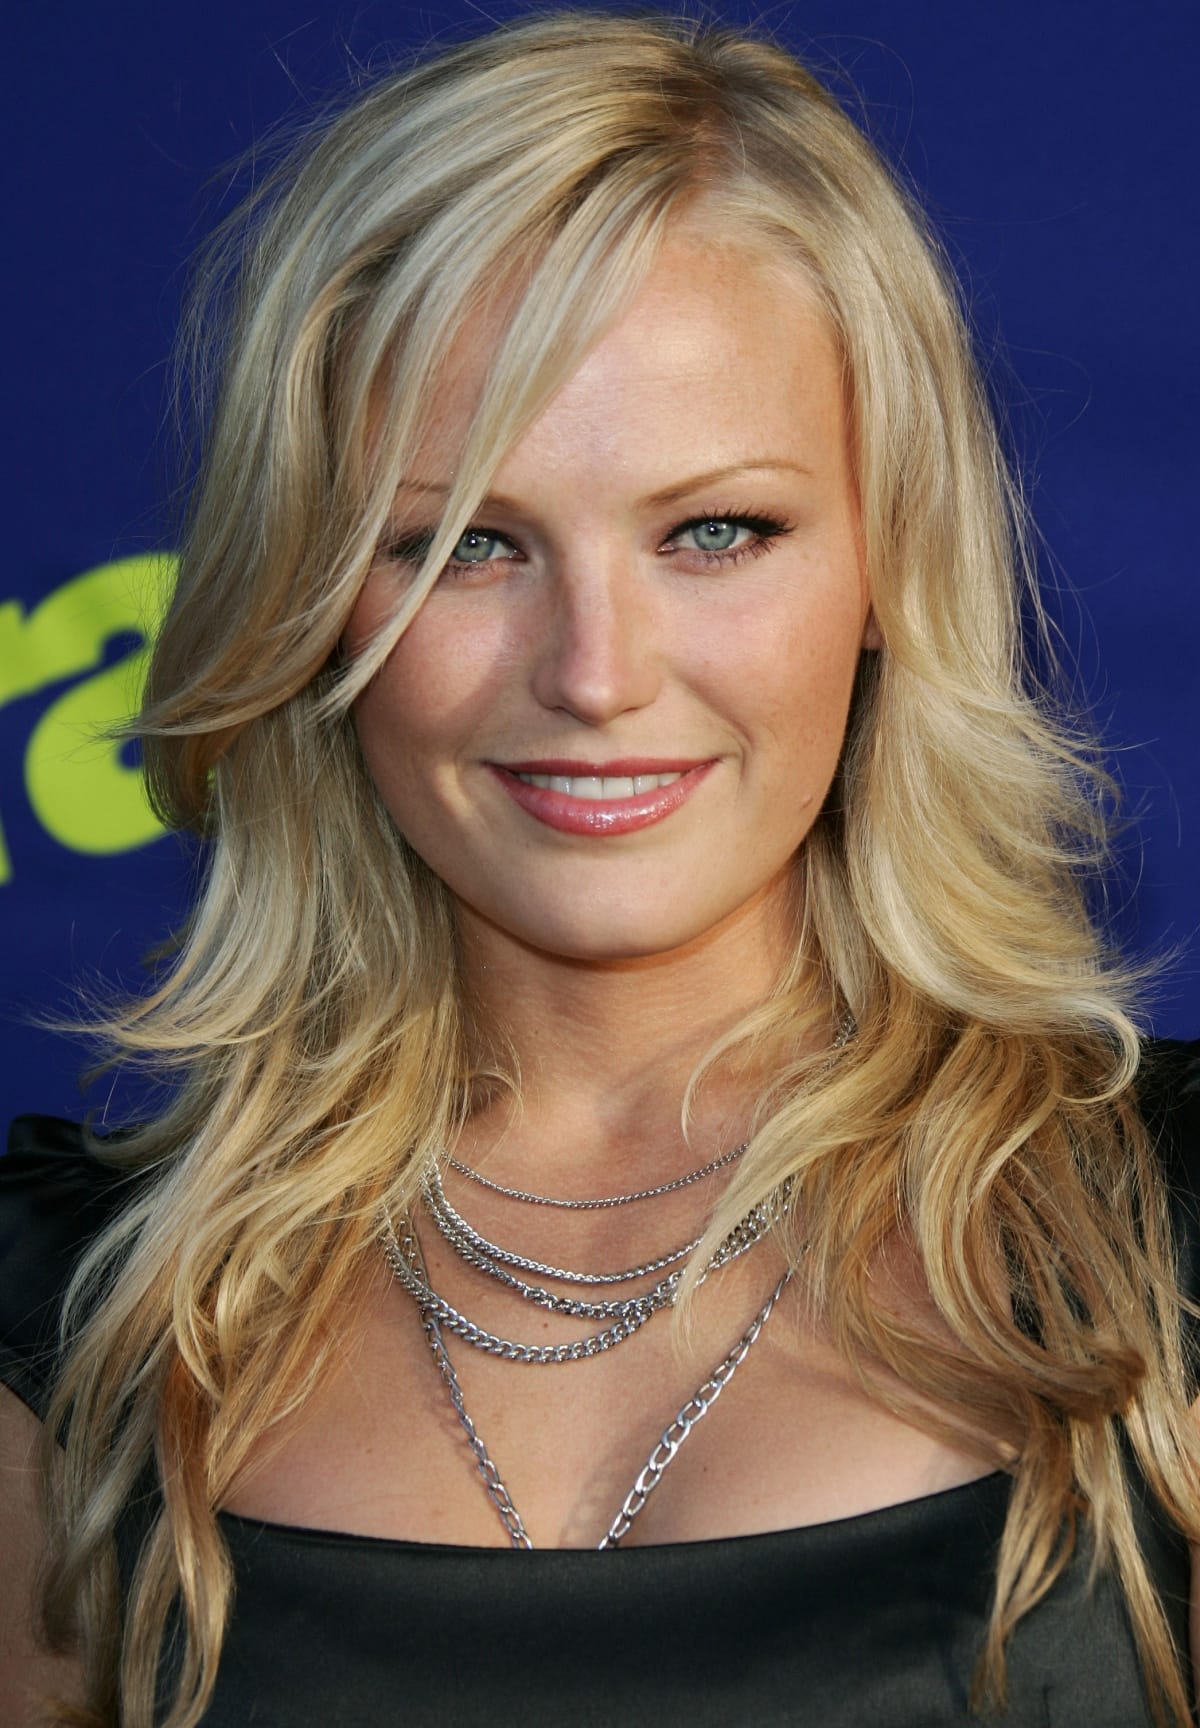 Malin Akerman at the premiere of Entourage in Los Angeles